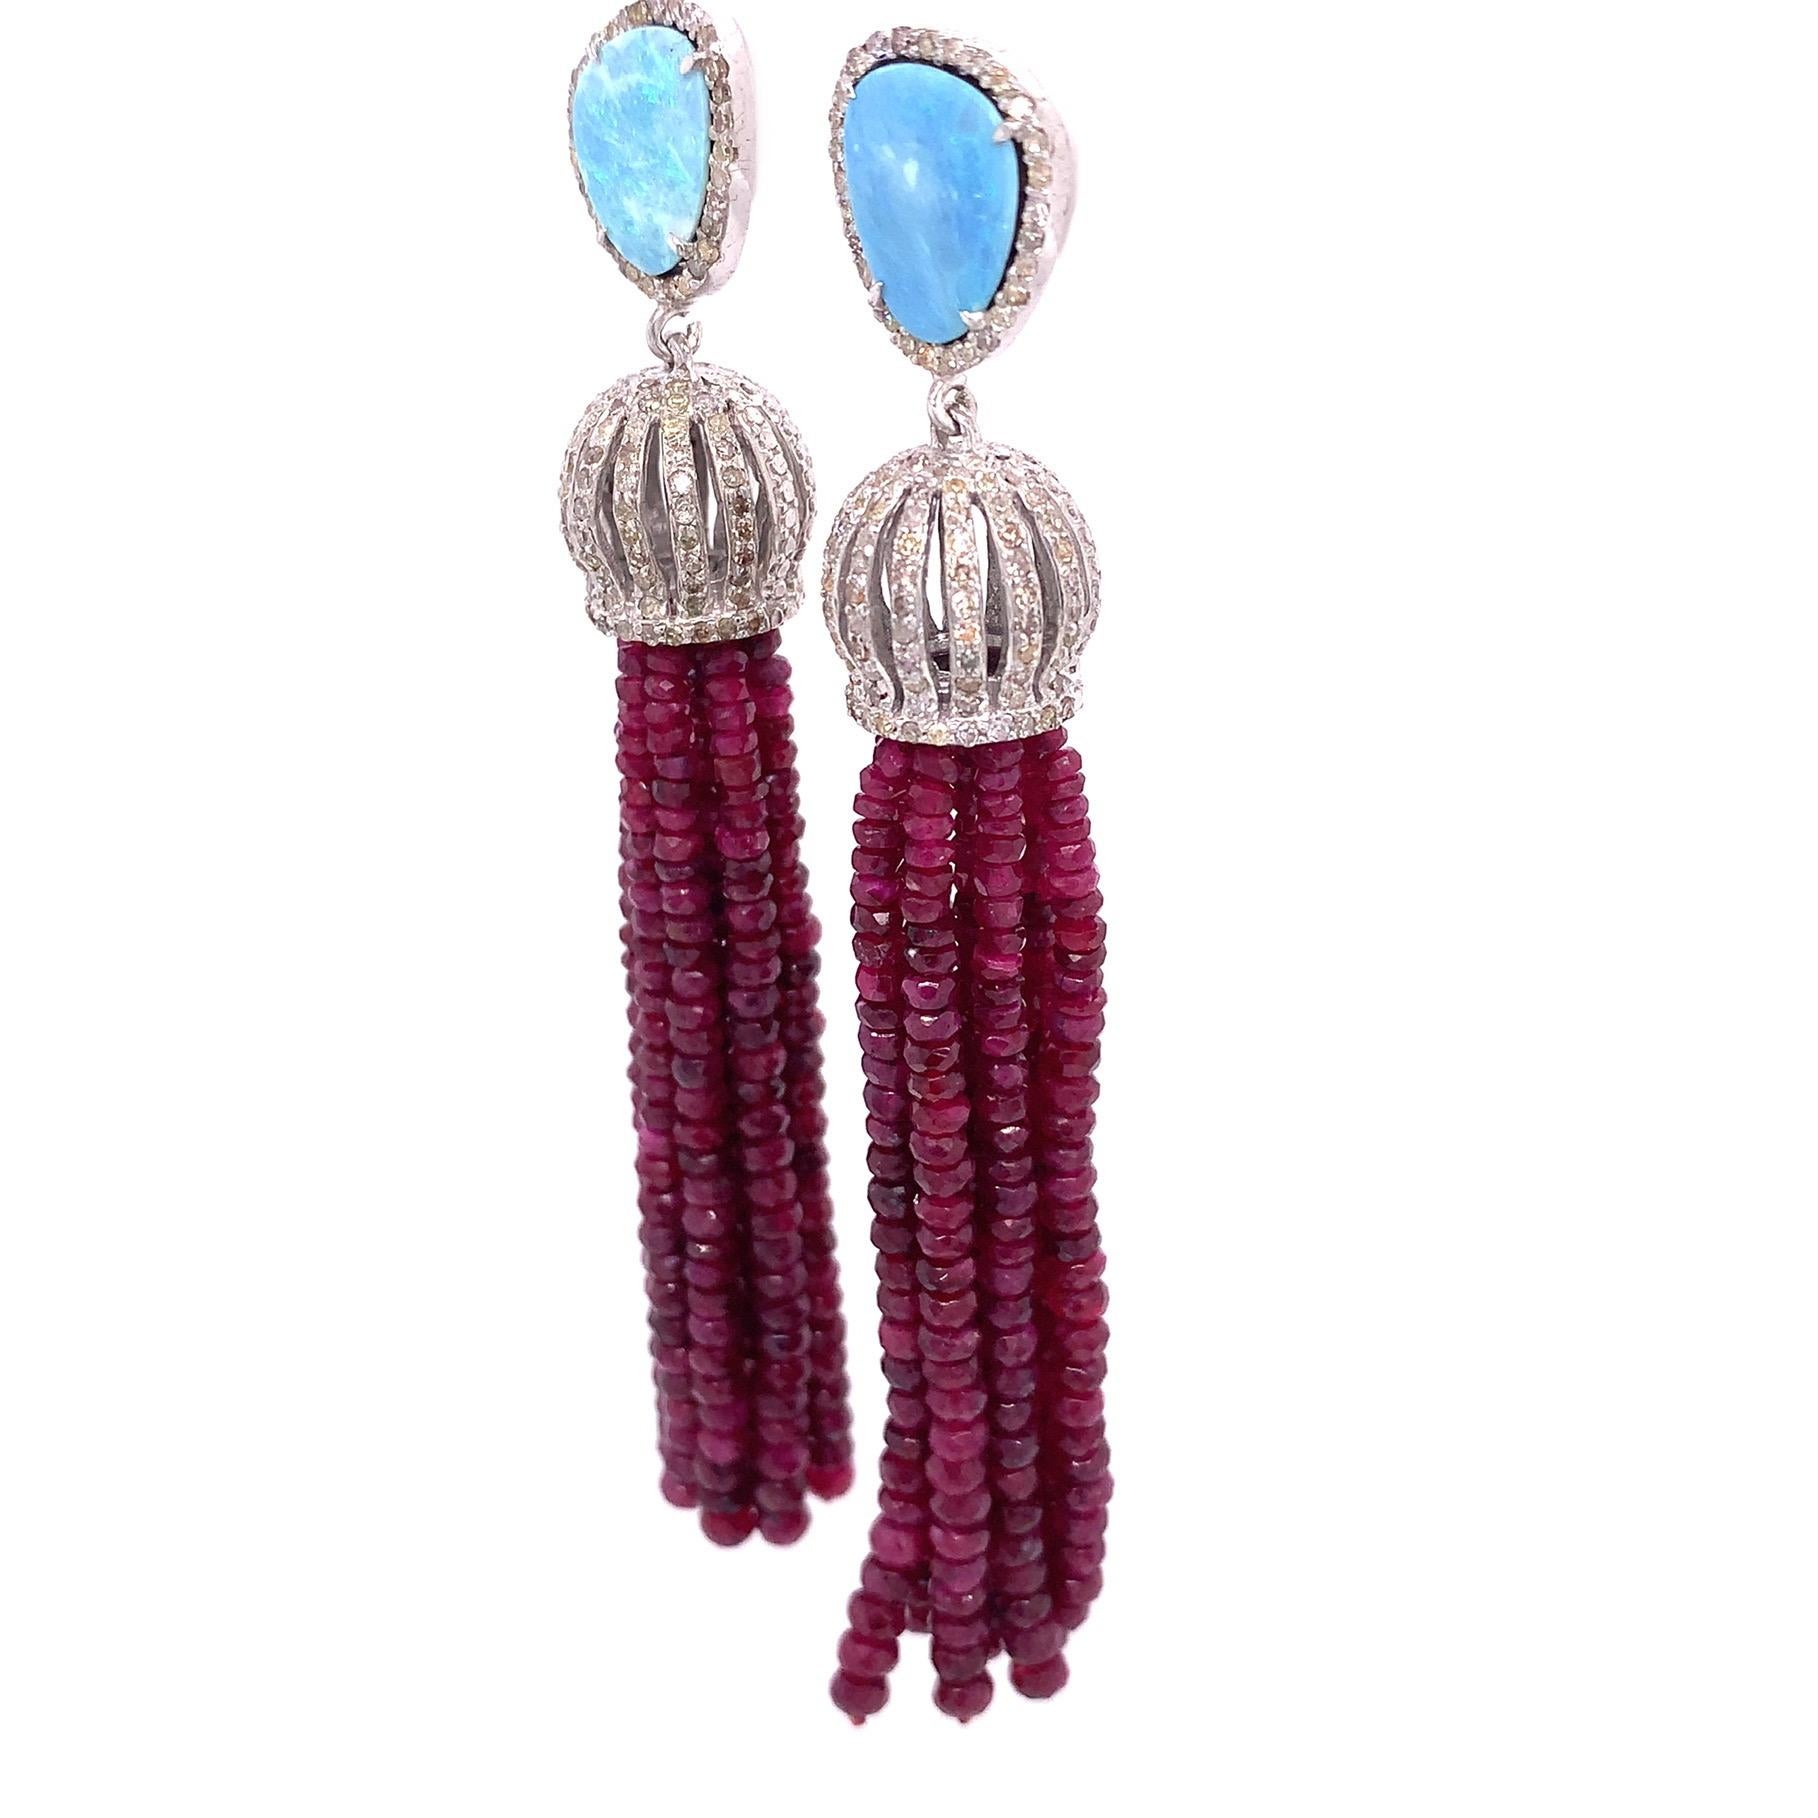 Life in Color Collection

Ruby beads featured tassel dangling from a bead cup set with Diamonds in Sterling Silver.

Ruby: 92.23 ct total weight.
Opal: 3.91 ct total weight.
Diamond: 1.51 ct total weight.